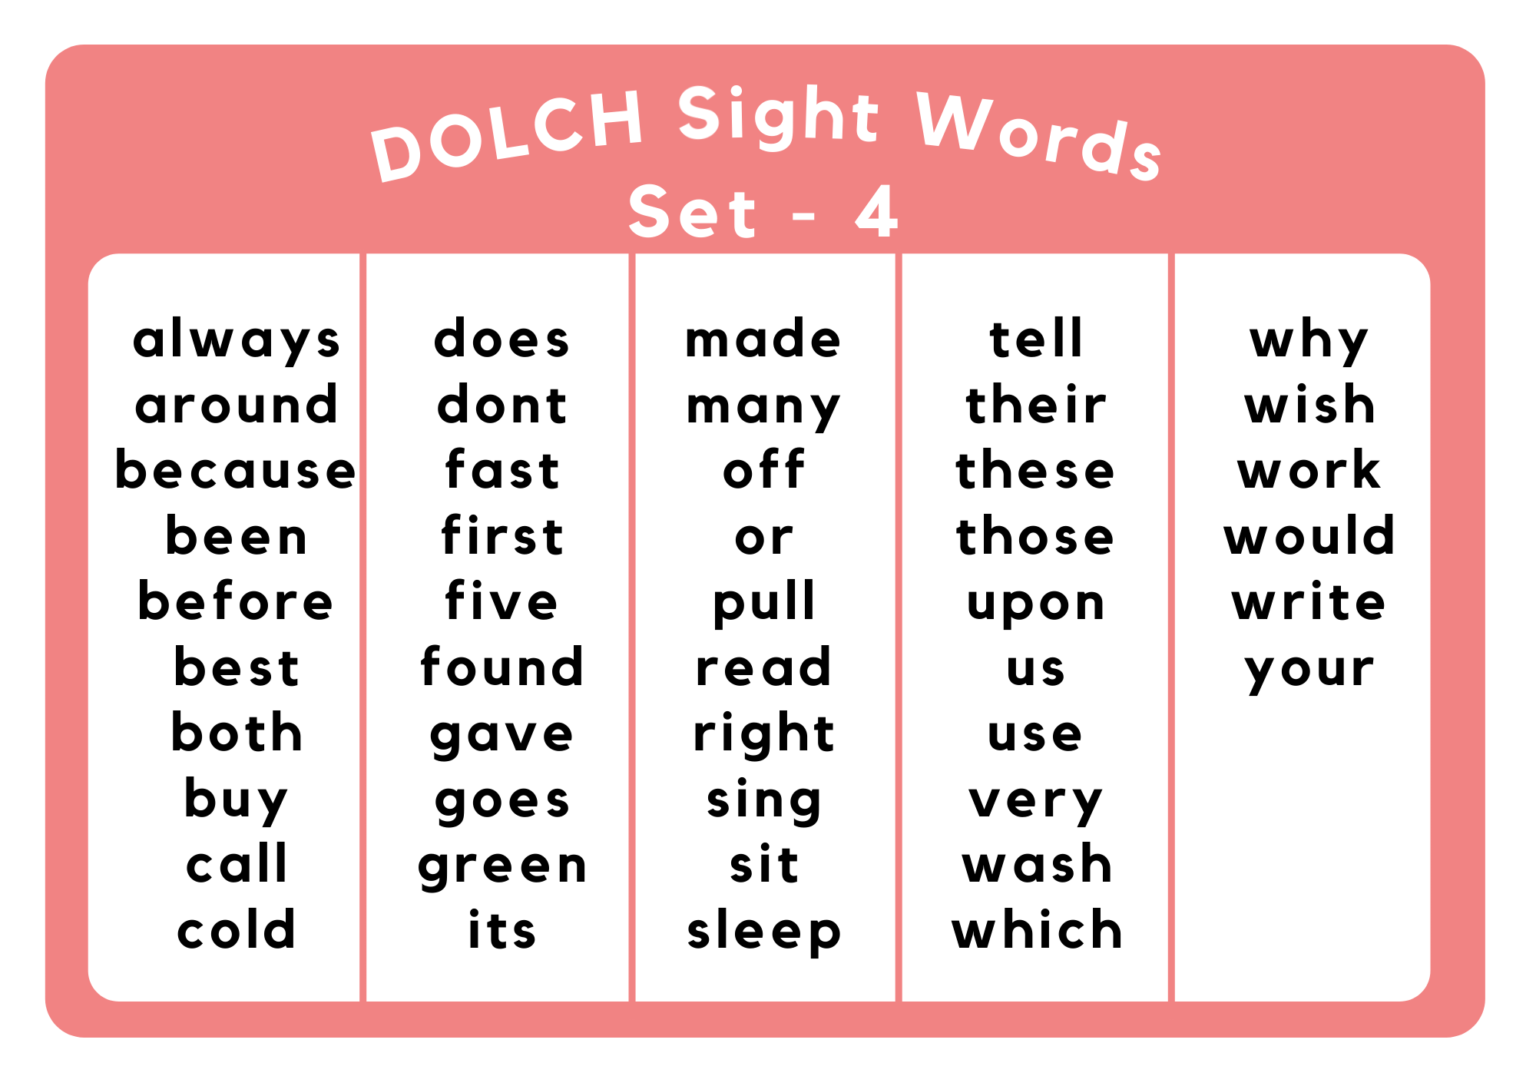 Dolch Sight Word List Grade 1